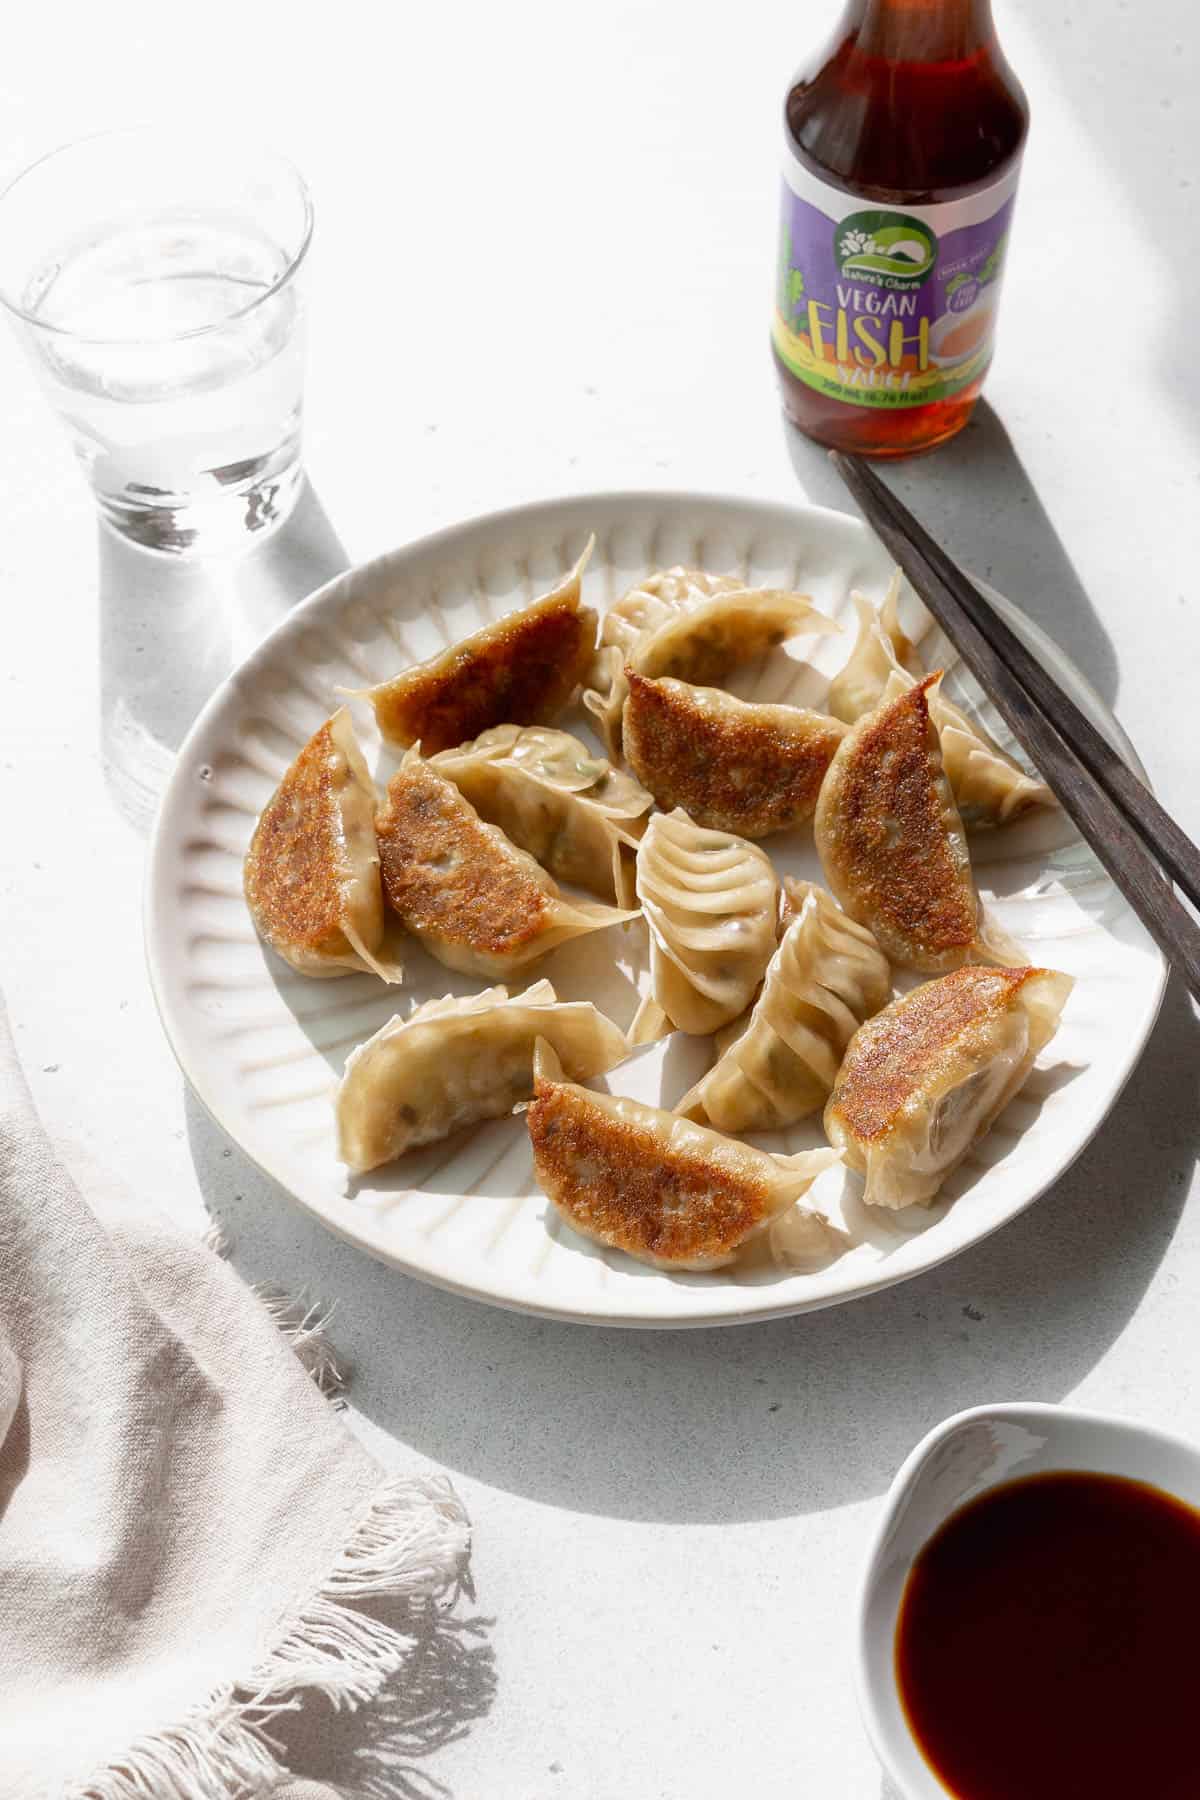 Angled shot of vegetable gyoza on a white plate with a glass of water and a bottle of vegan fish sauce in the background.